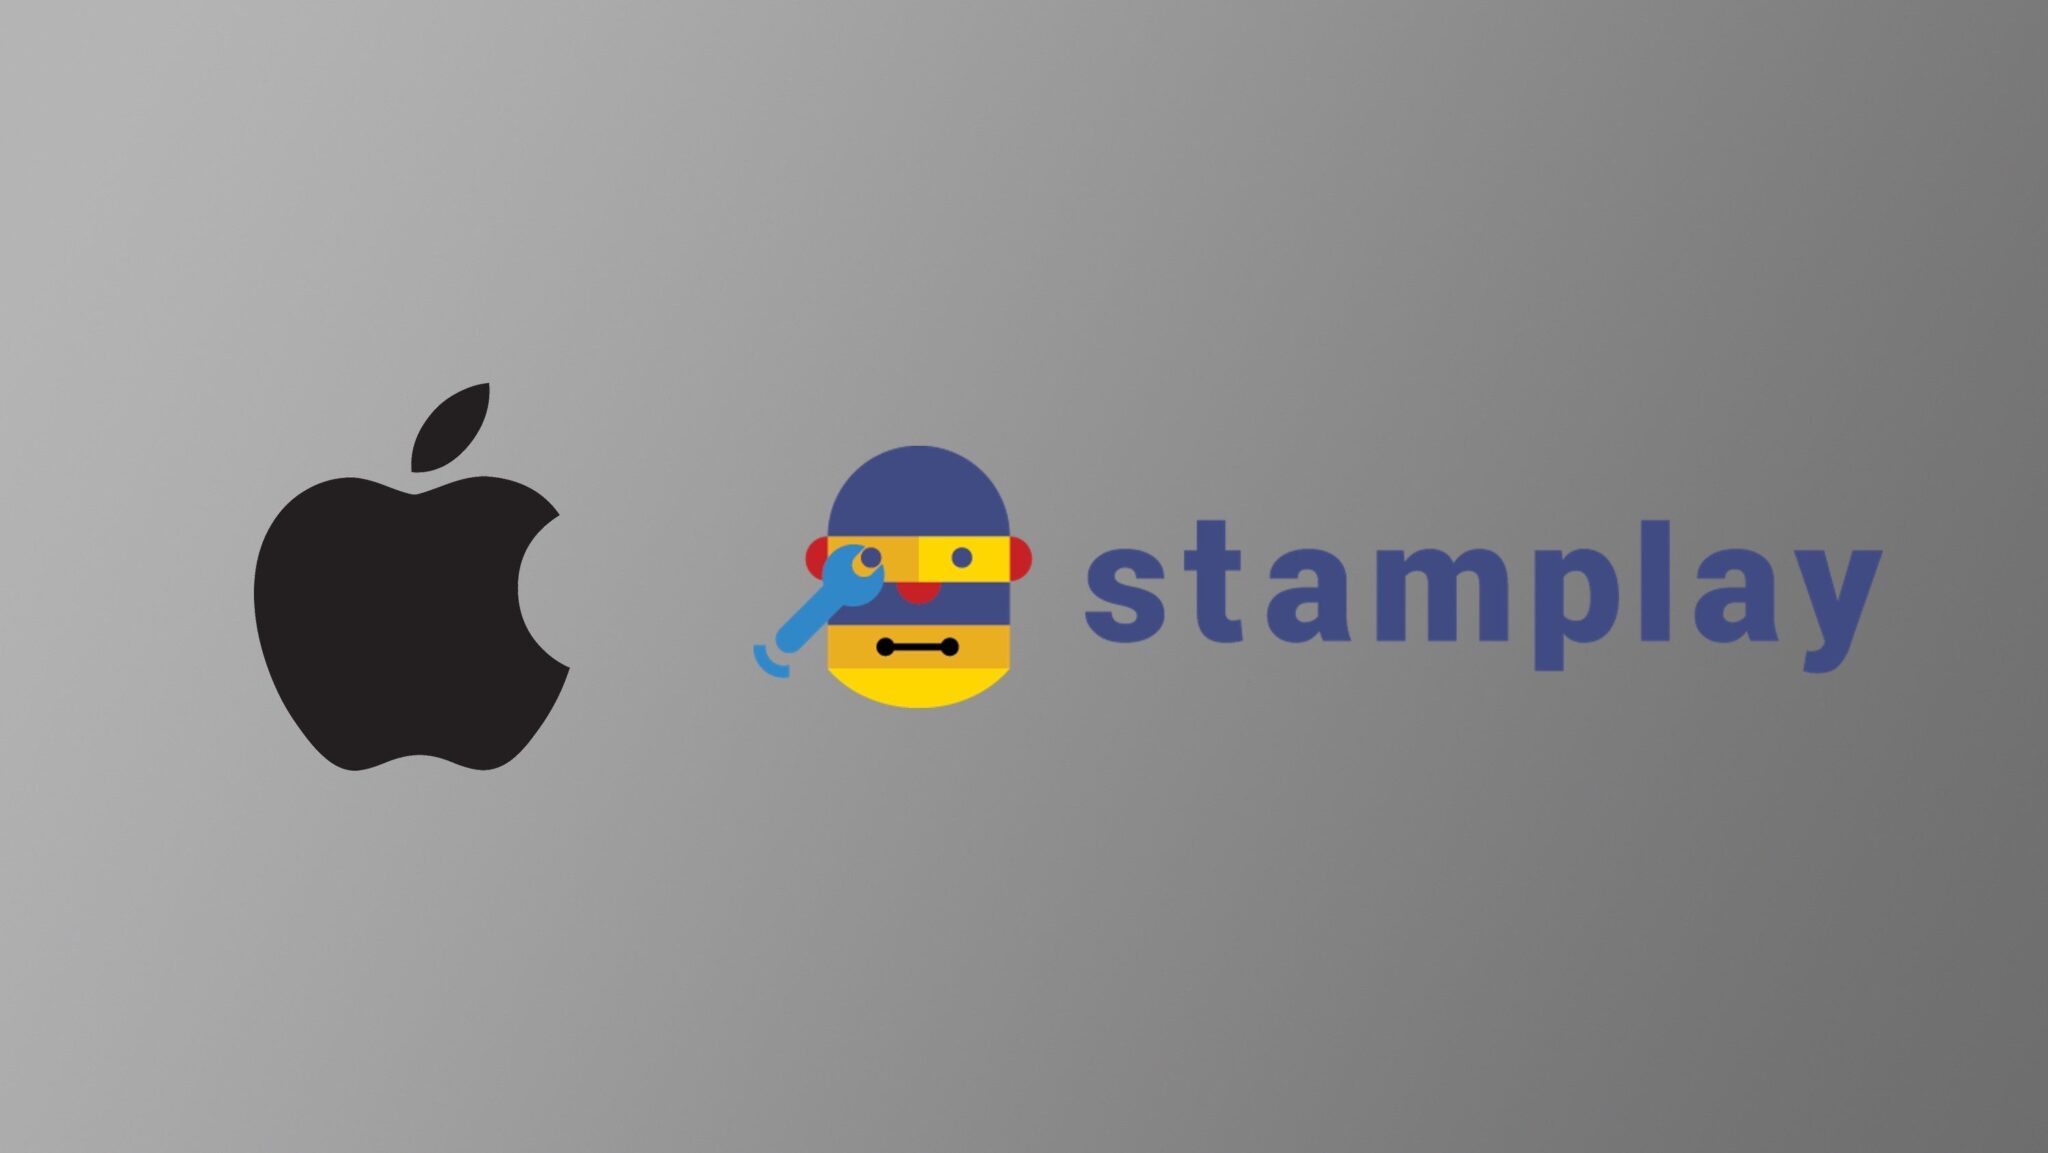 Apple, Acquista, Stamplay